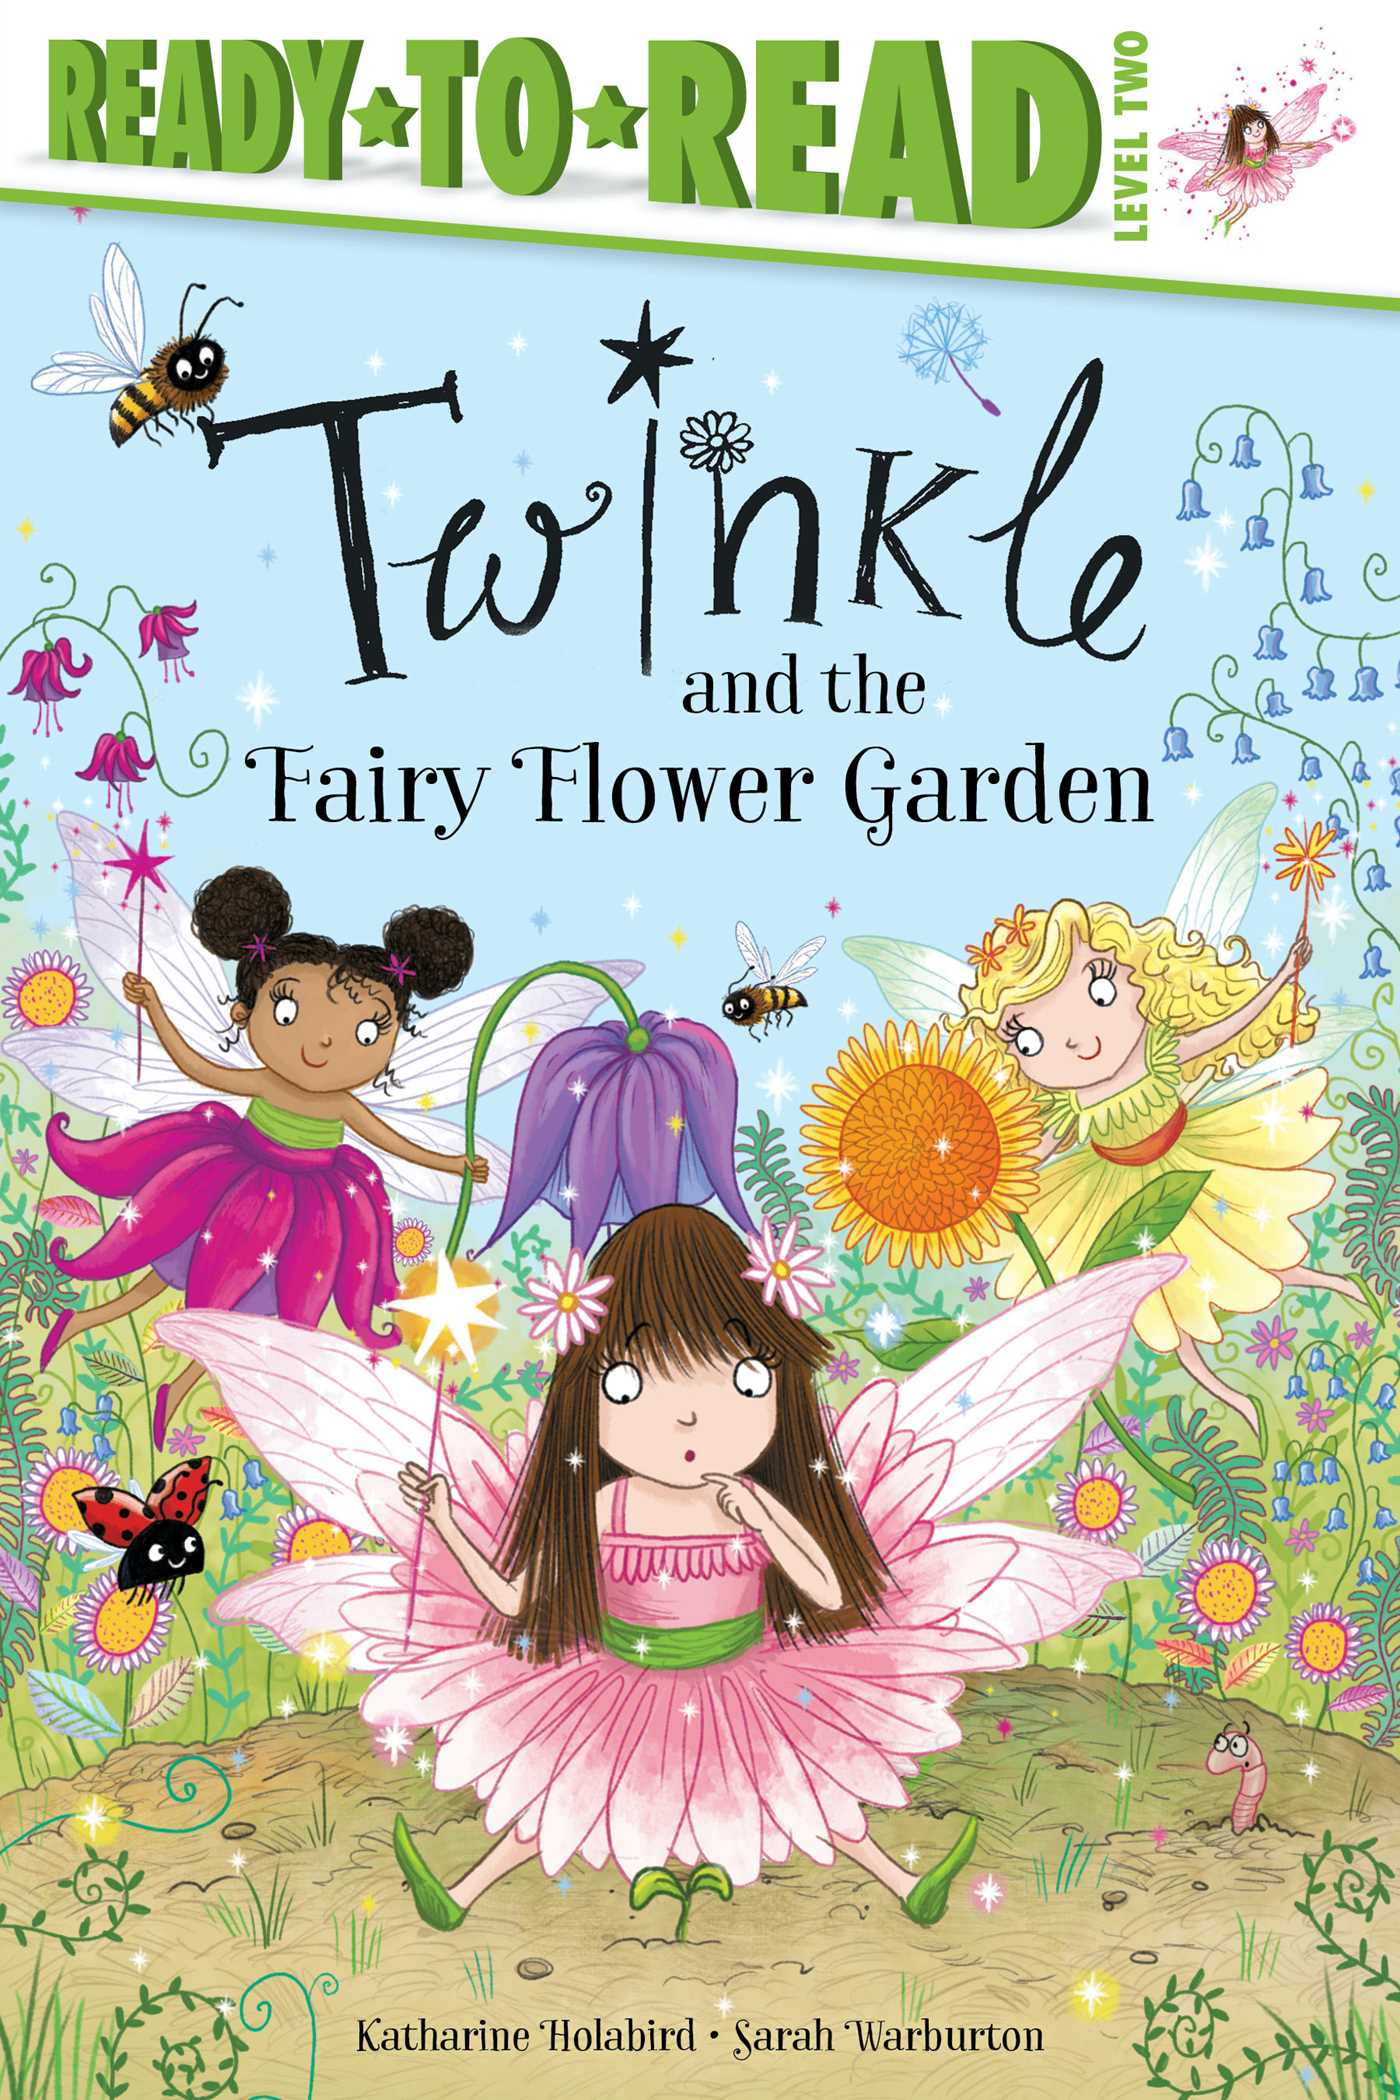 Ready-to-Read - Twinkle and the Fairy Flower Garden  | First reader